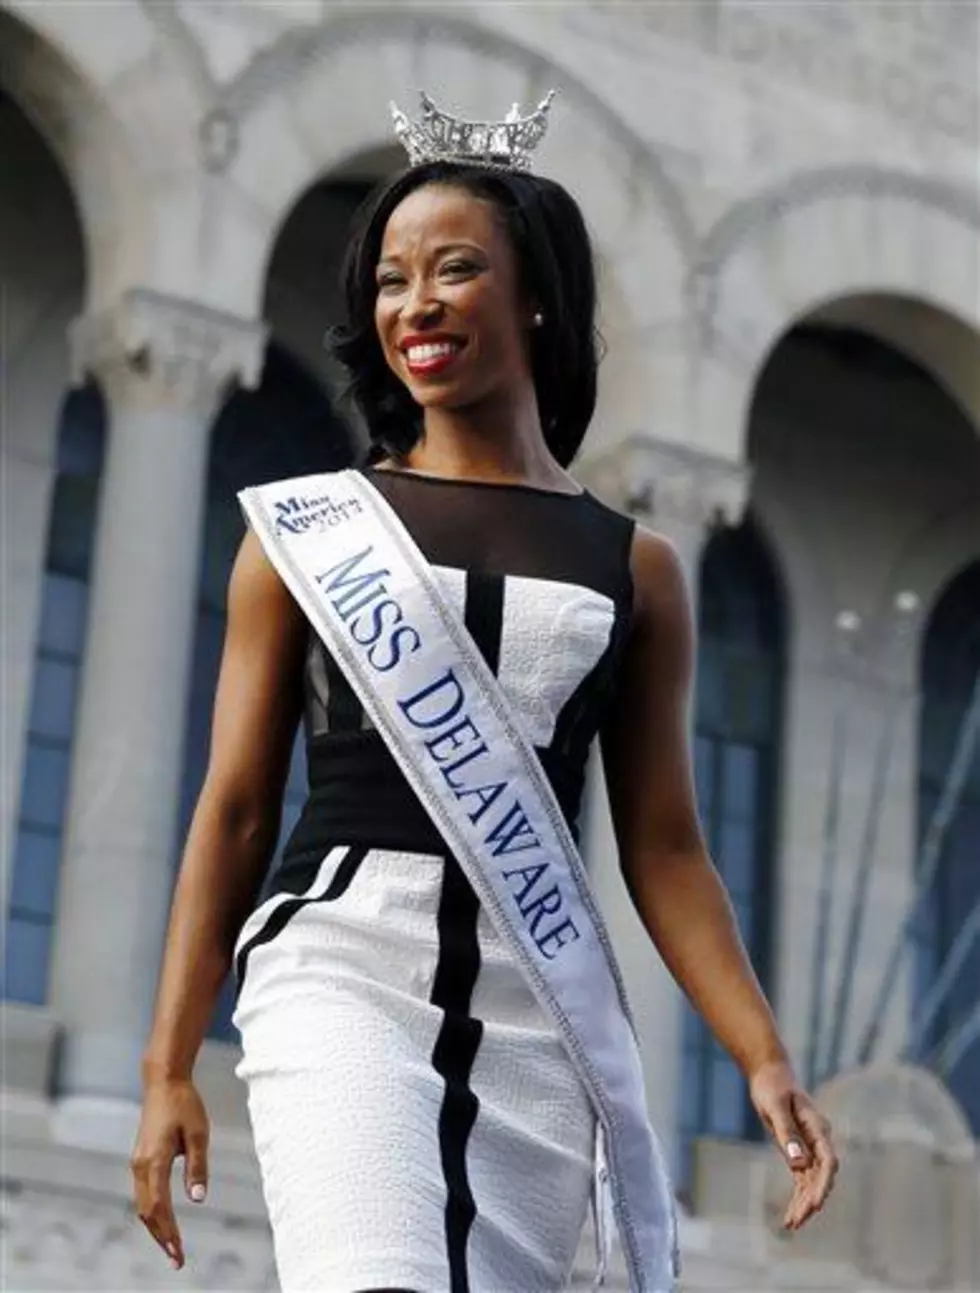 Family tragedy shapes platforms of some Miss America contestants